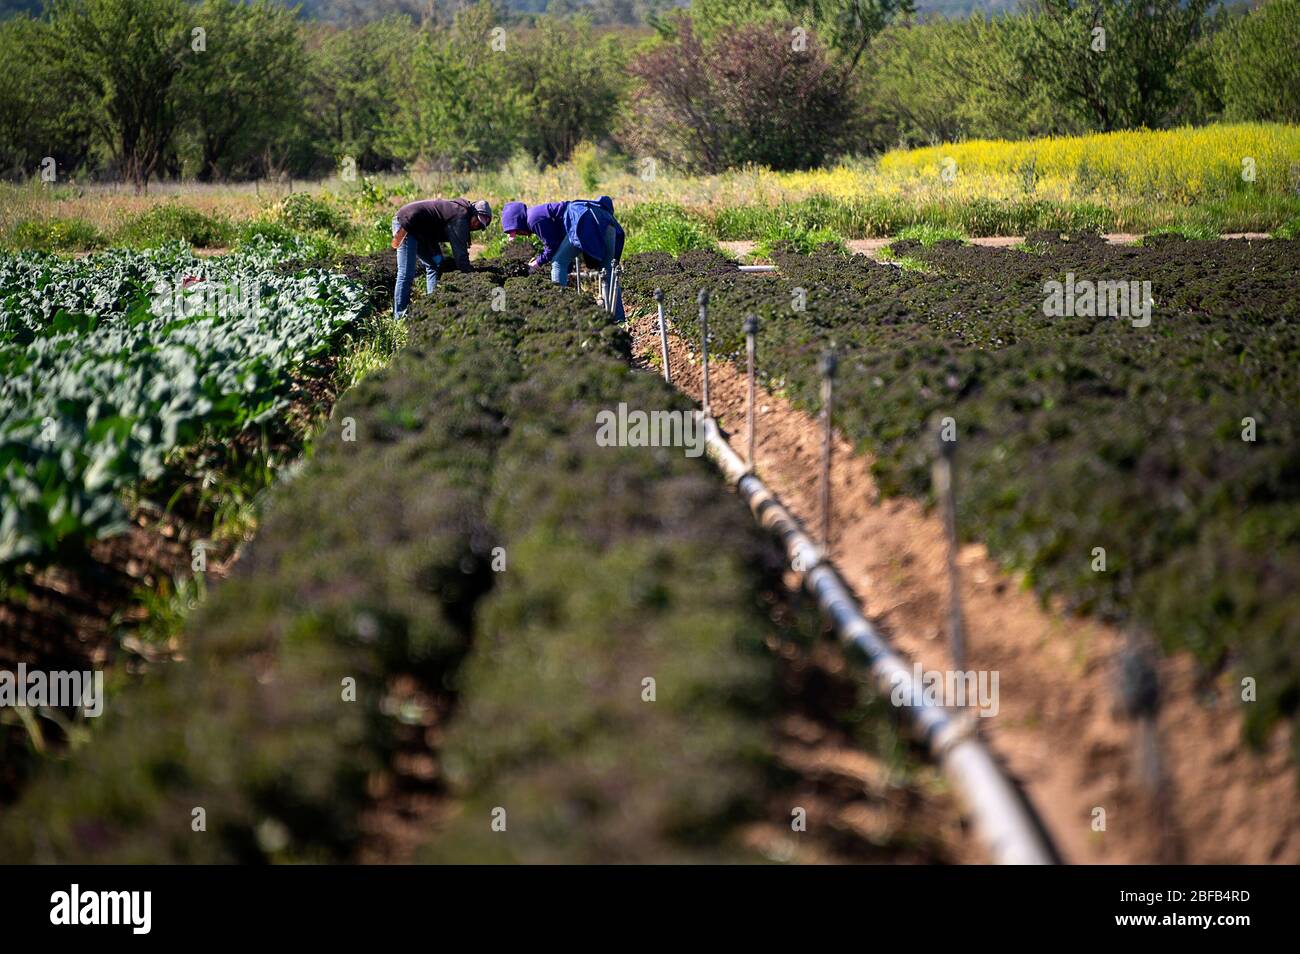 Brooks, CA, USA. 16th Apr, 2020. Farm workers at the organic Riverdog Farm in Guida stands pick redbor kale during the coronavirus pandemic on Thursday, April 16, 2020. Riverdog Farm works 450 acres of land in the Capay Valley and her company has had four-fold increase in sale of the csa (community supported agriculture) boxes of fresh produce as her restaurants sales have diminished. Credit: Paul Kitagaki Jr./ZUMA Wire/Alamy Live News Stock Photo